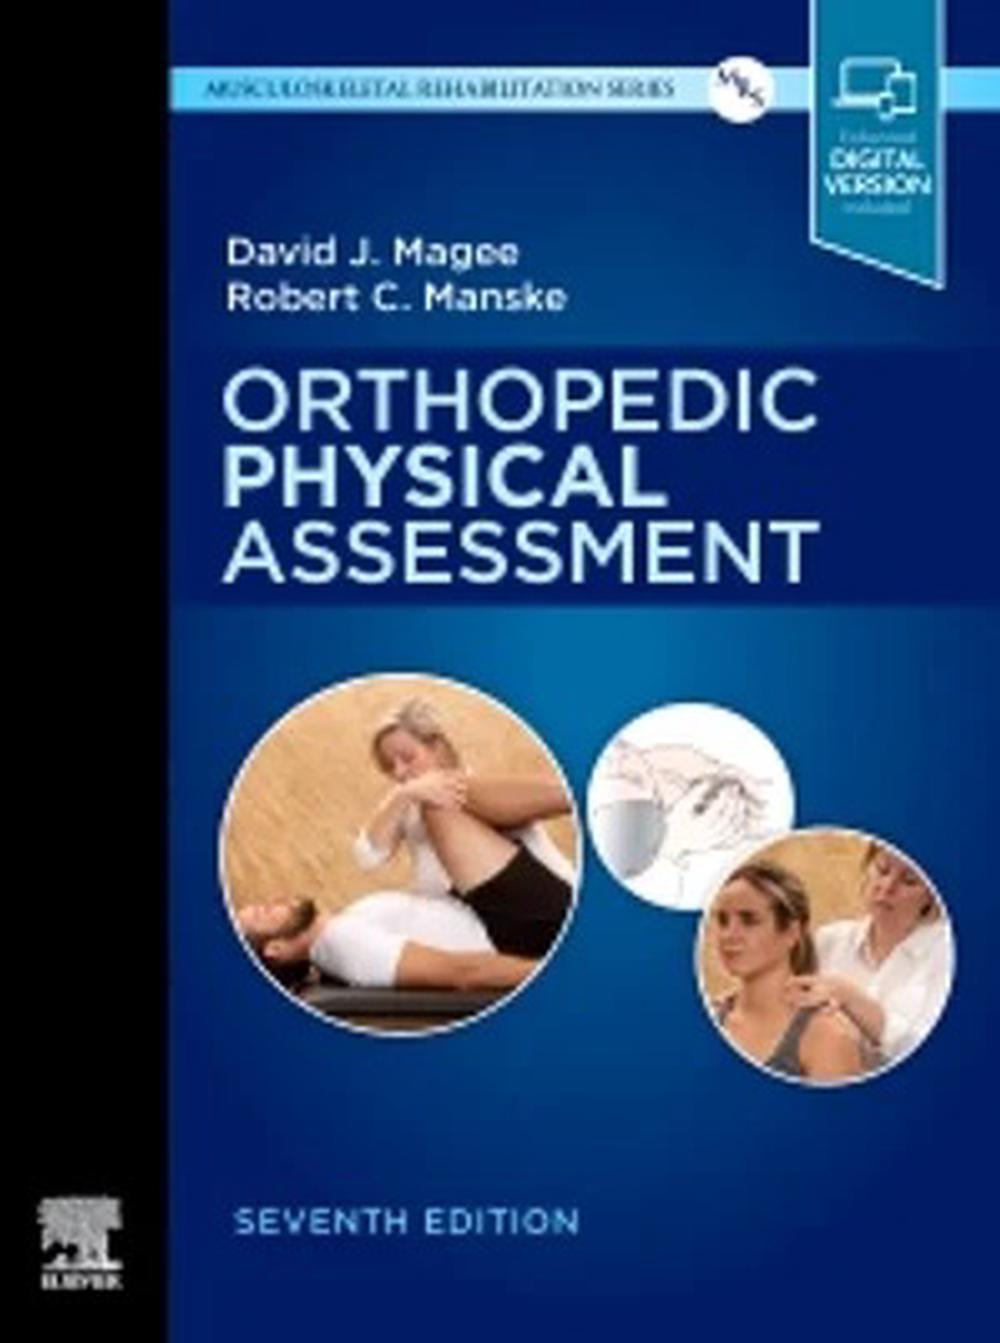 The　by　Hardcover,　David　Assessment,　online　Orthopedic　Nile　Buy　7th　J.　Physical　9780323749510　at　Edition　Magee,